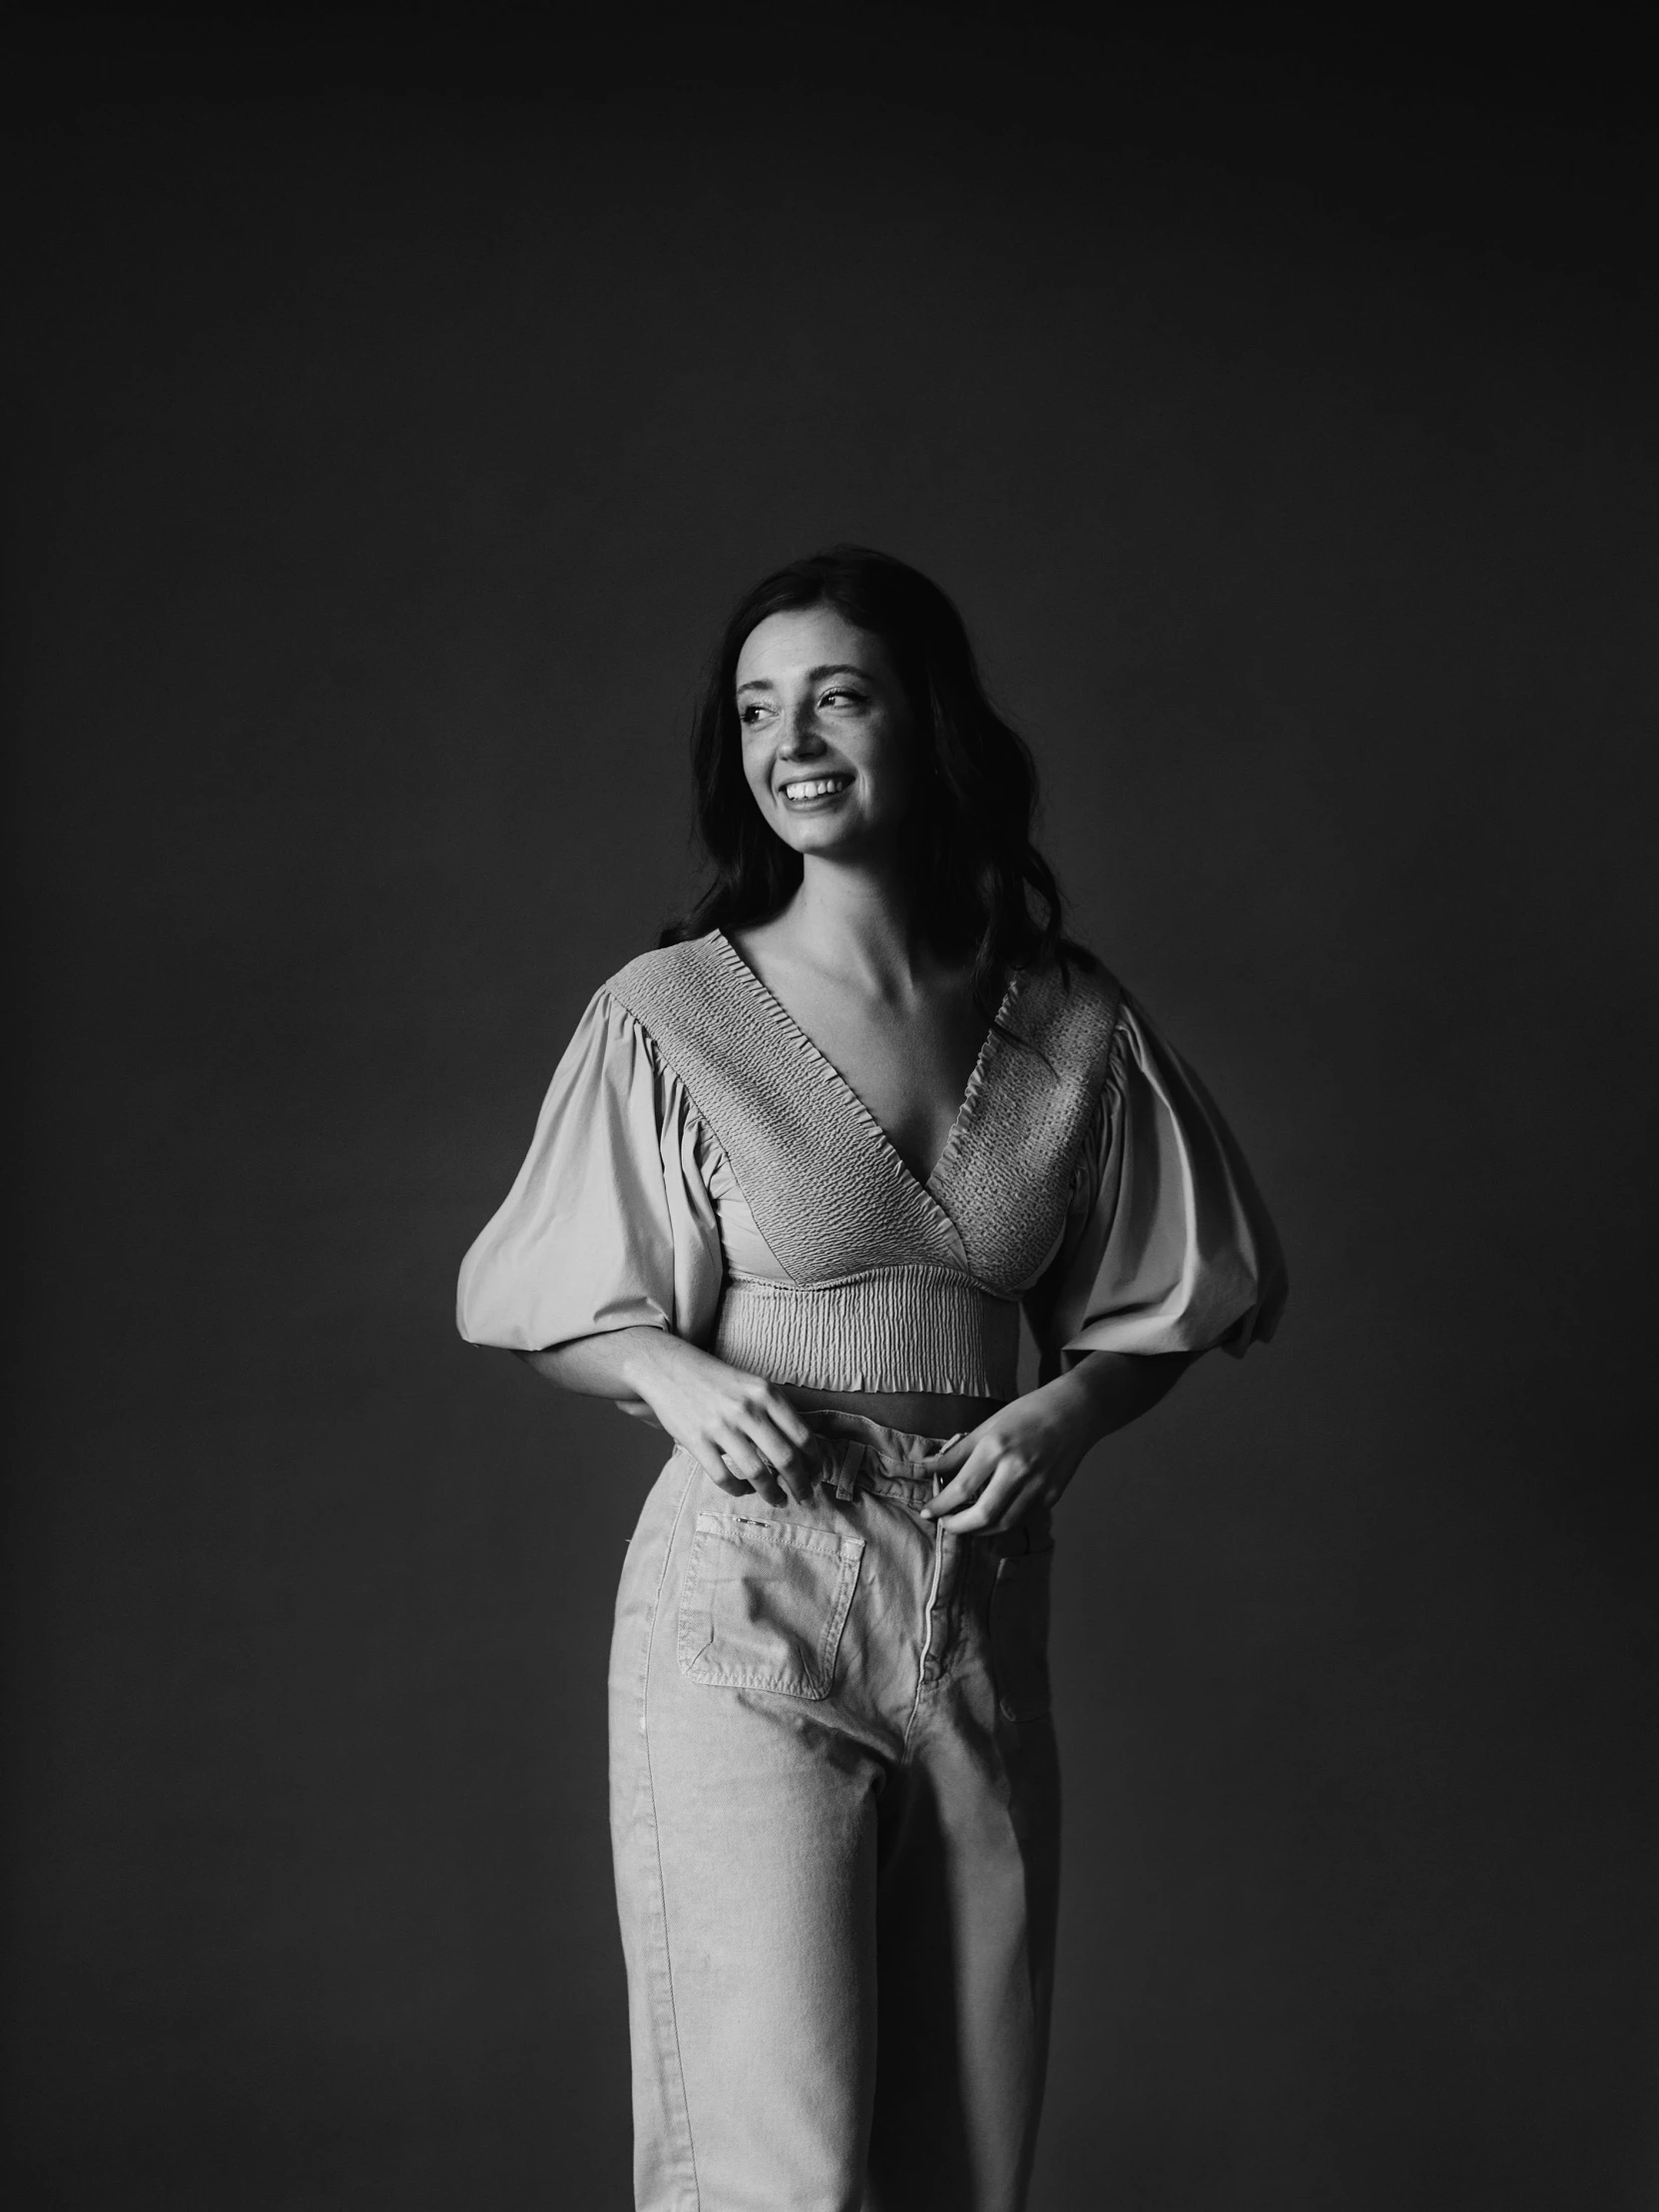 a woman standing in a black and white photo, a black and white photo, by Adam Marczyński, charli bowater, smiling, artem chebokha, official product photo